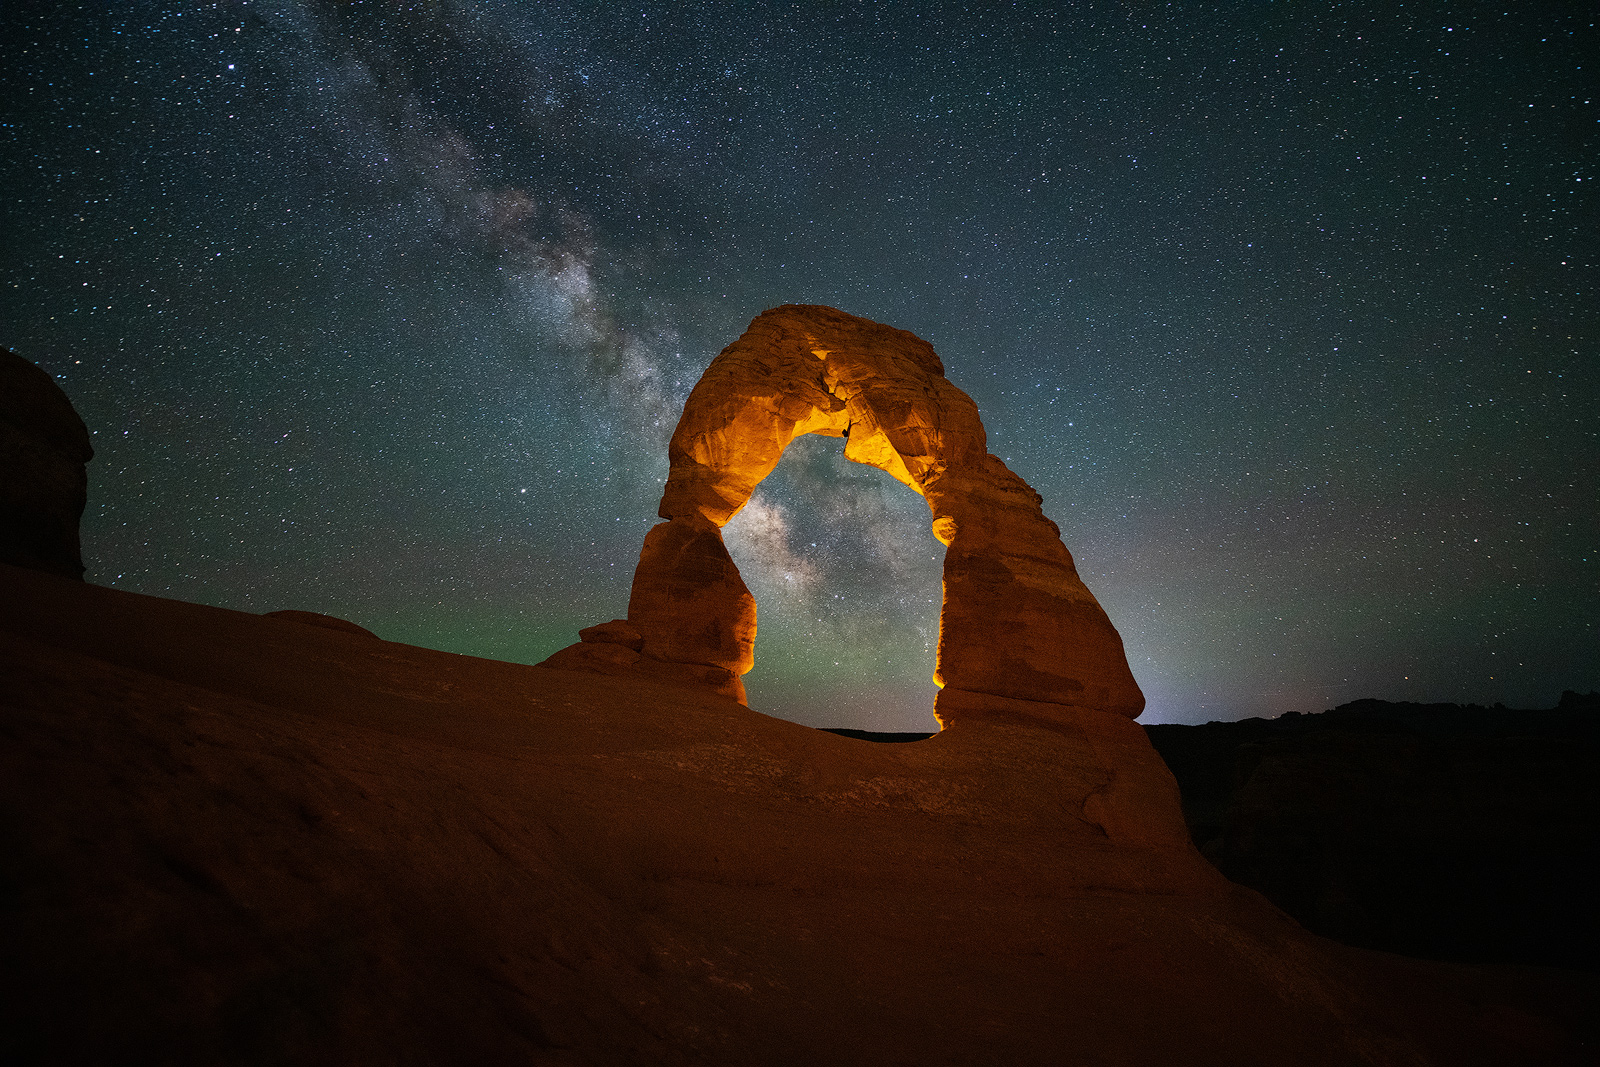 arches national park, arches, mesa arch, delicate arch, north window arch, corona arch, wilson arch, astrophotography, landscape...